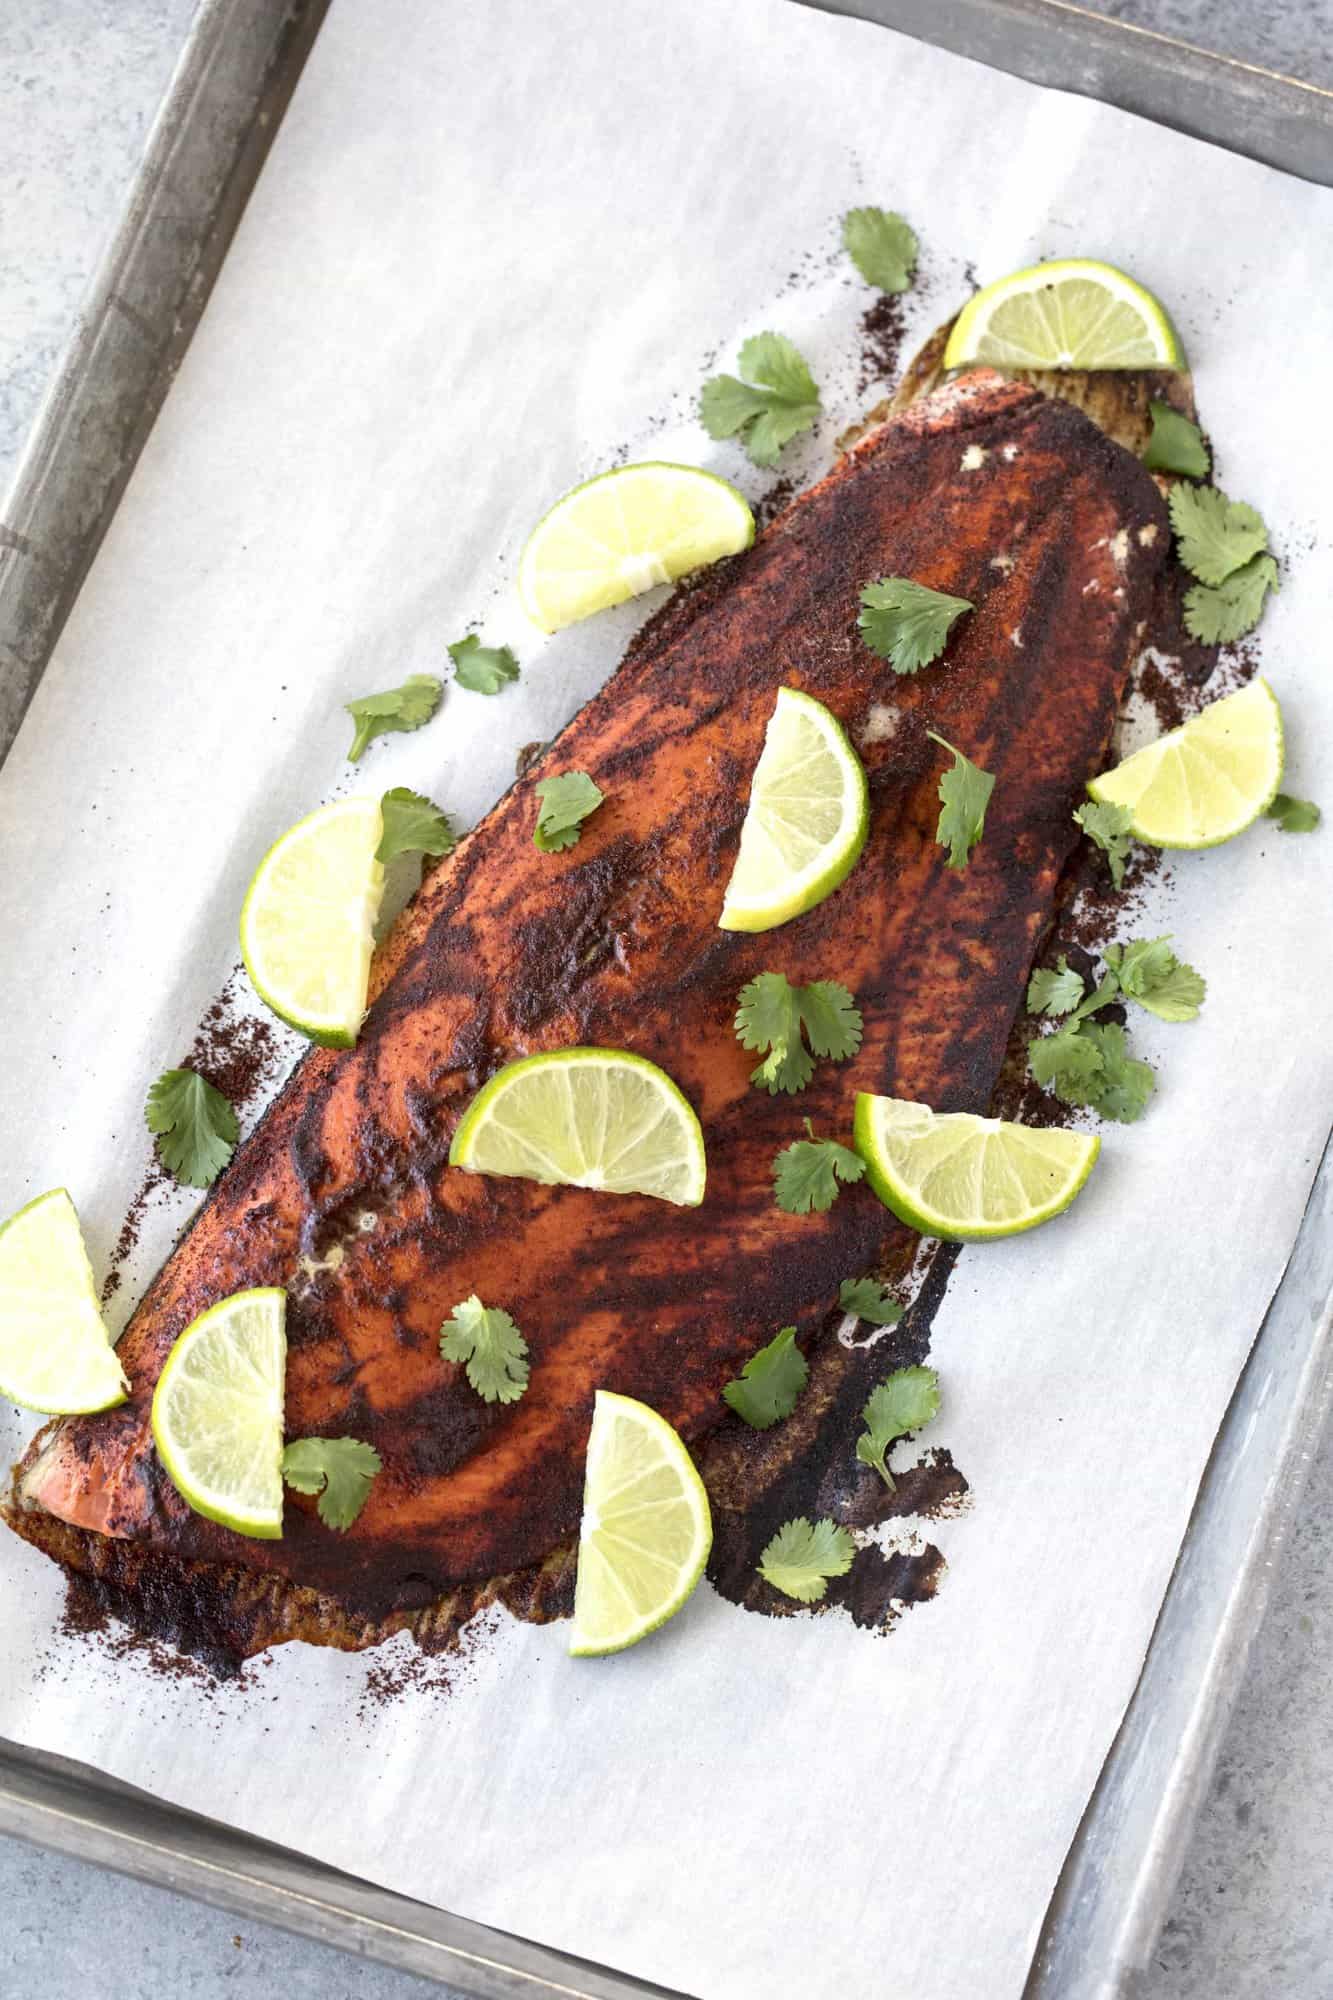 This Healthy Baked Chili Lime Salmon requires just 4 ingredients and 15 minutes to make. It's super healthy, and super flavorful. You can't beat this kind of easy recipe!